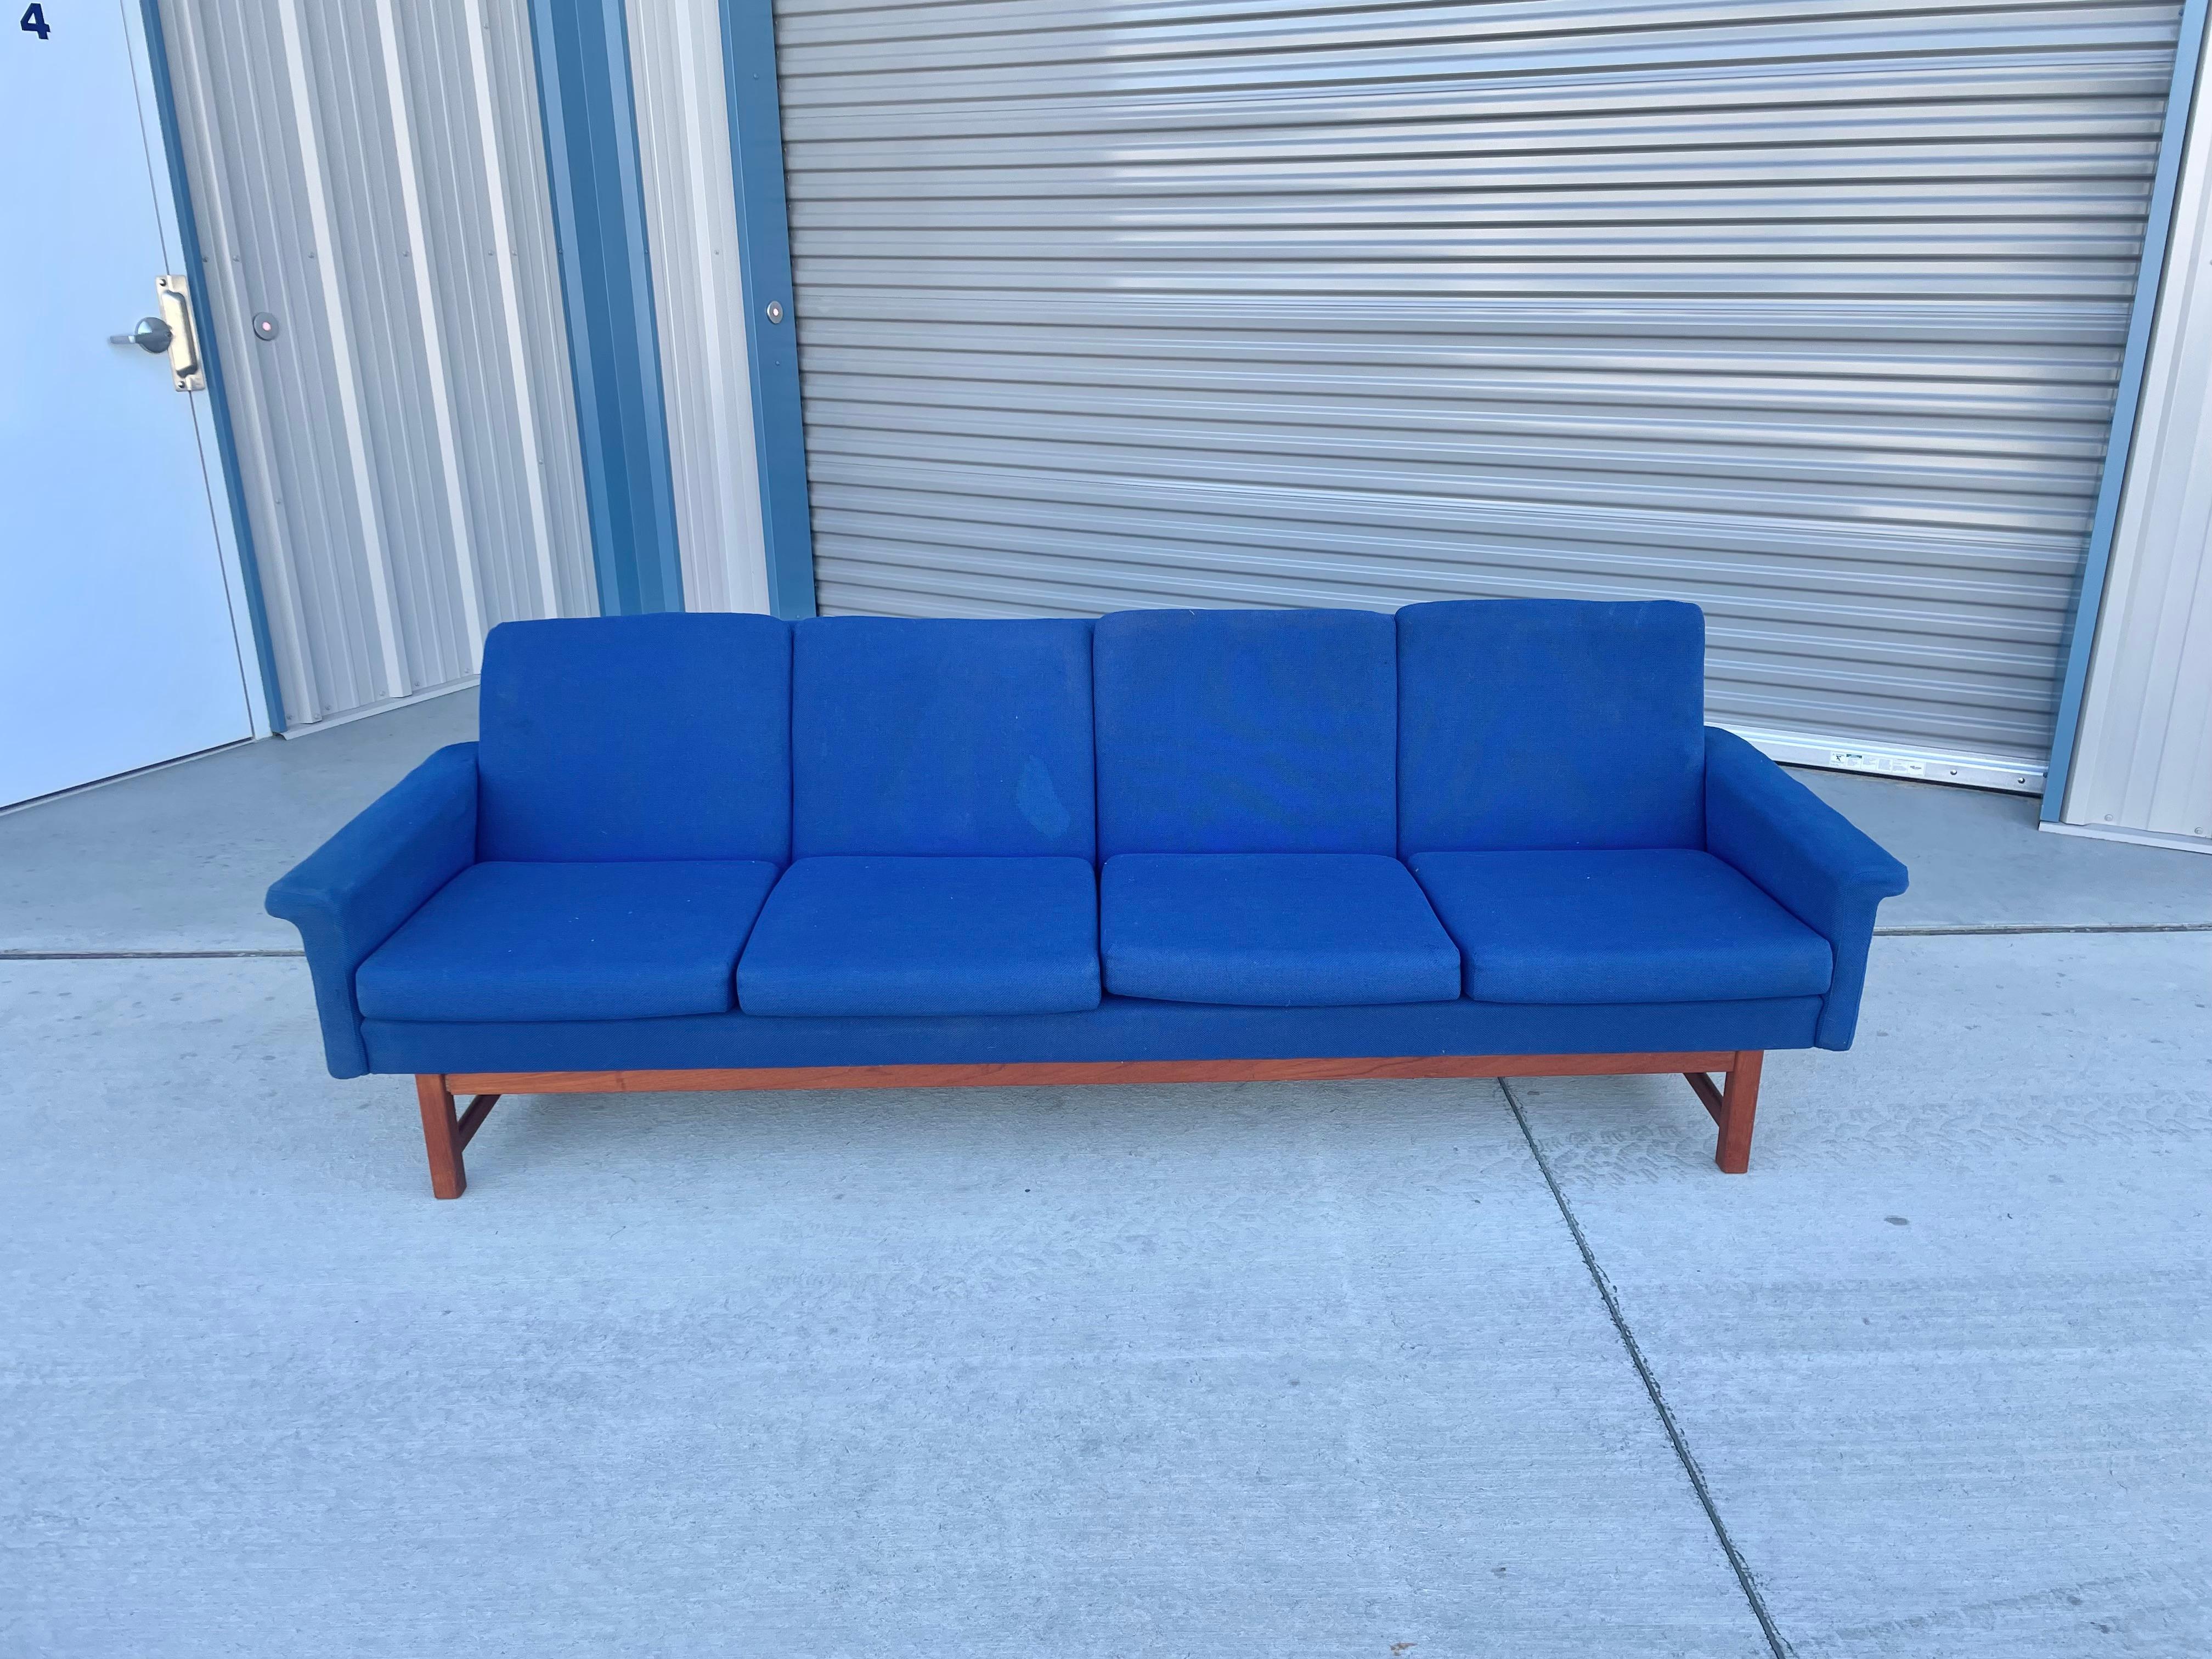 Danish modern teak sofa was designed and manufactured in Denmark circa 1960s. This beautiful sofa is covered in blue fabric upholstery on a teak frame that provides optimal comfort and style to add a modern flair to your home space.